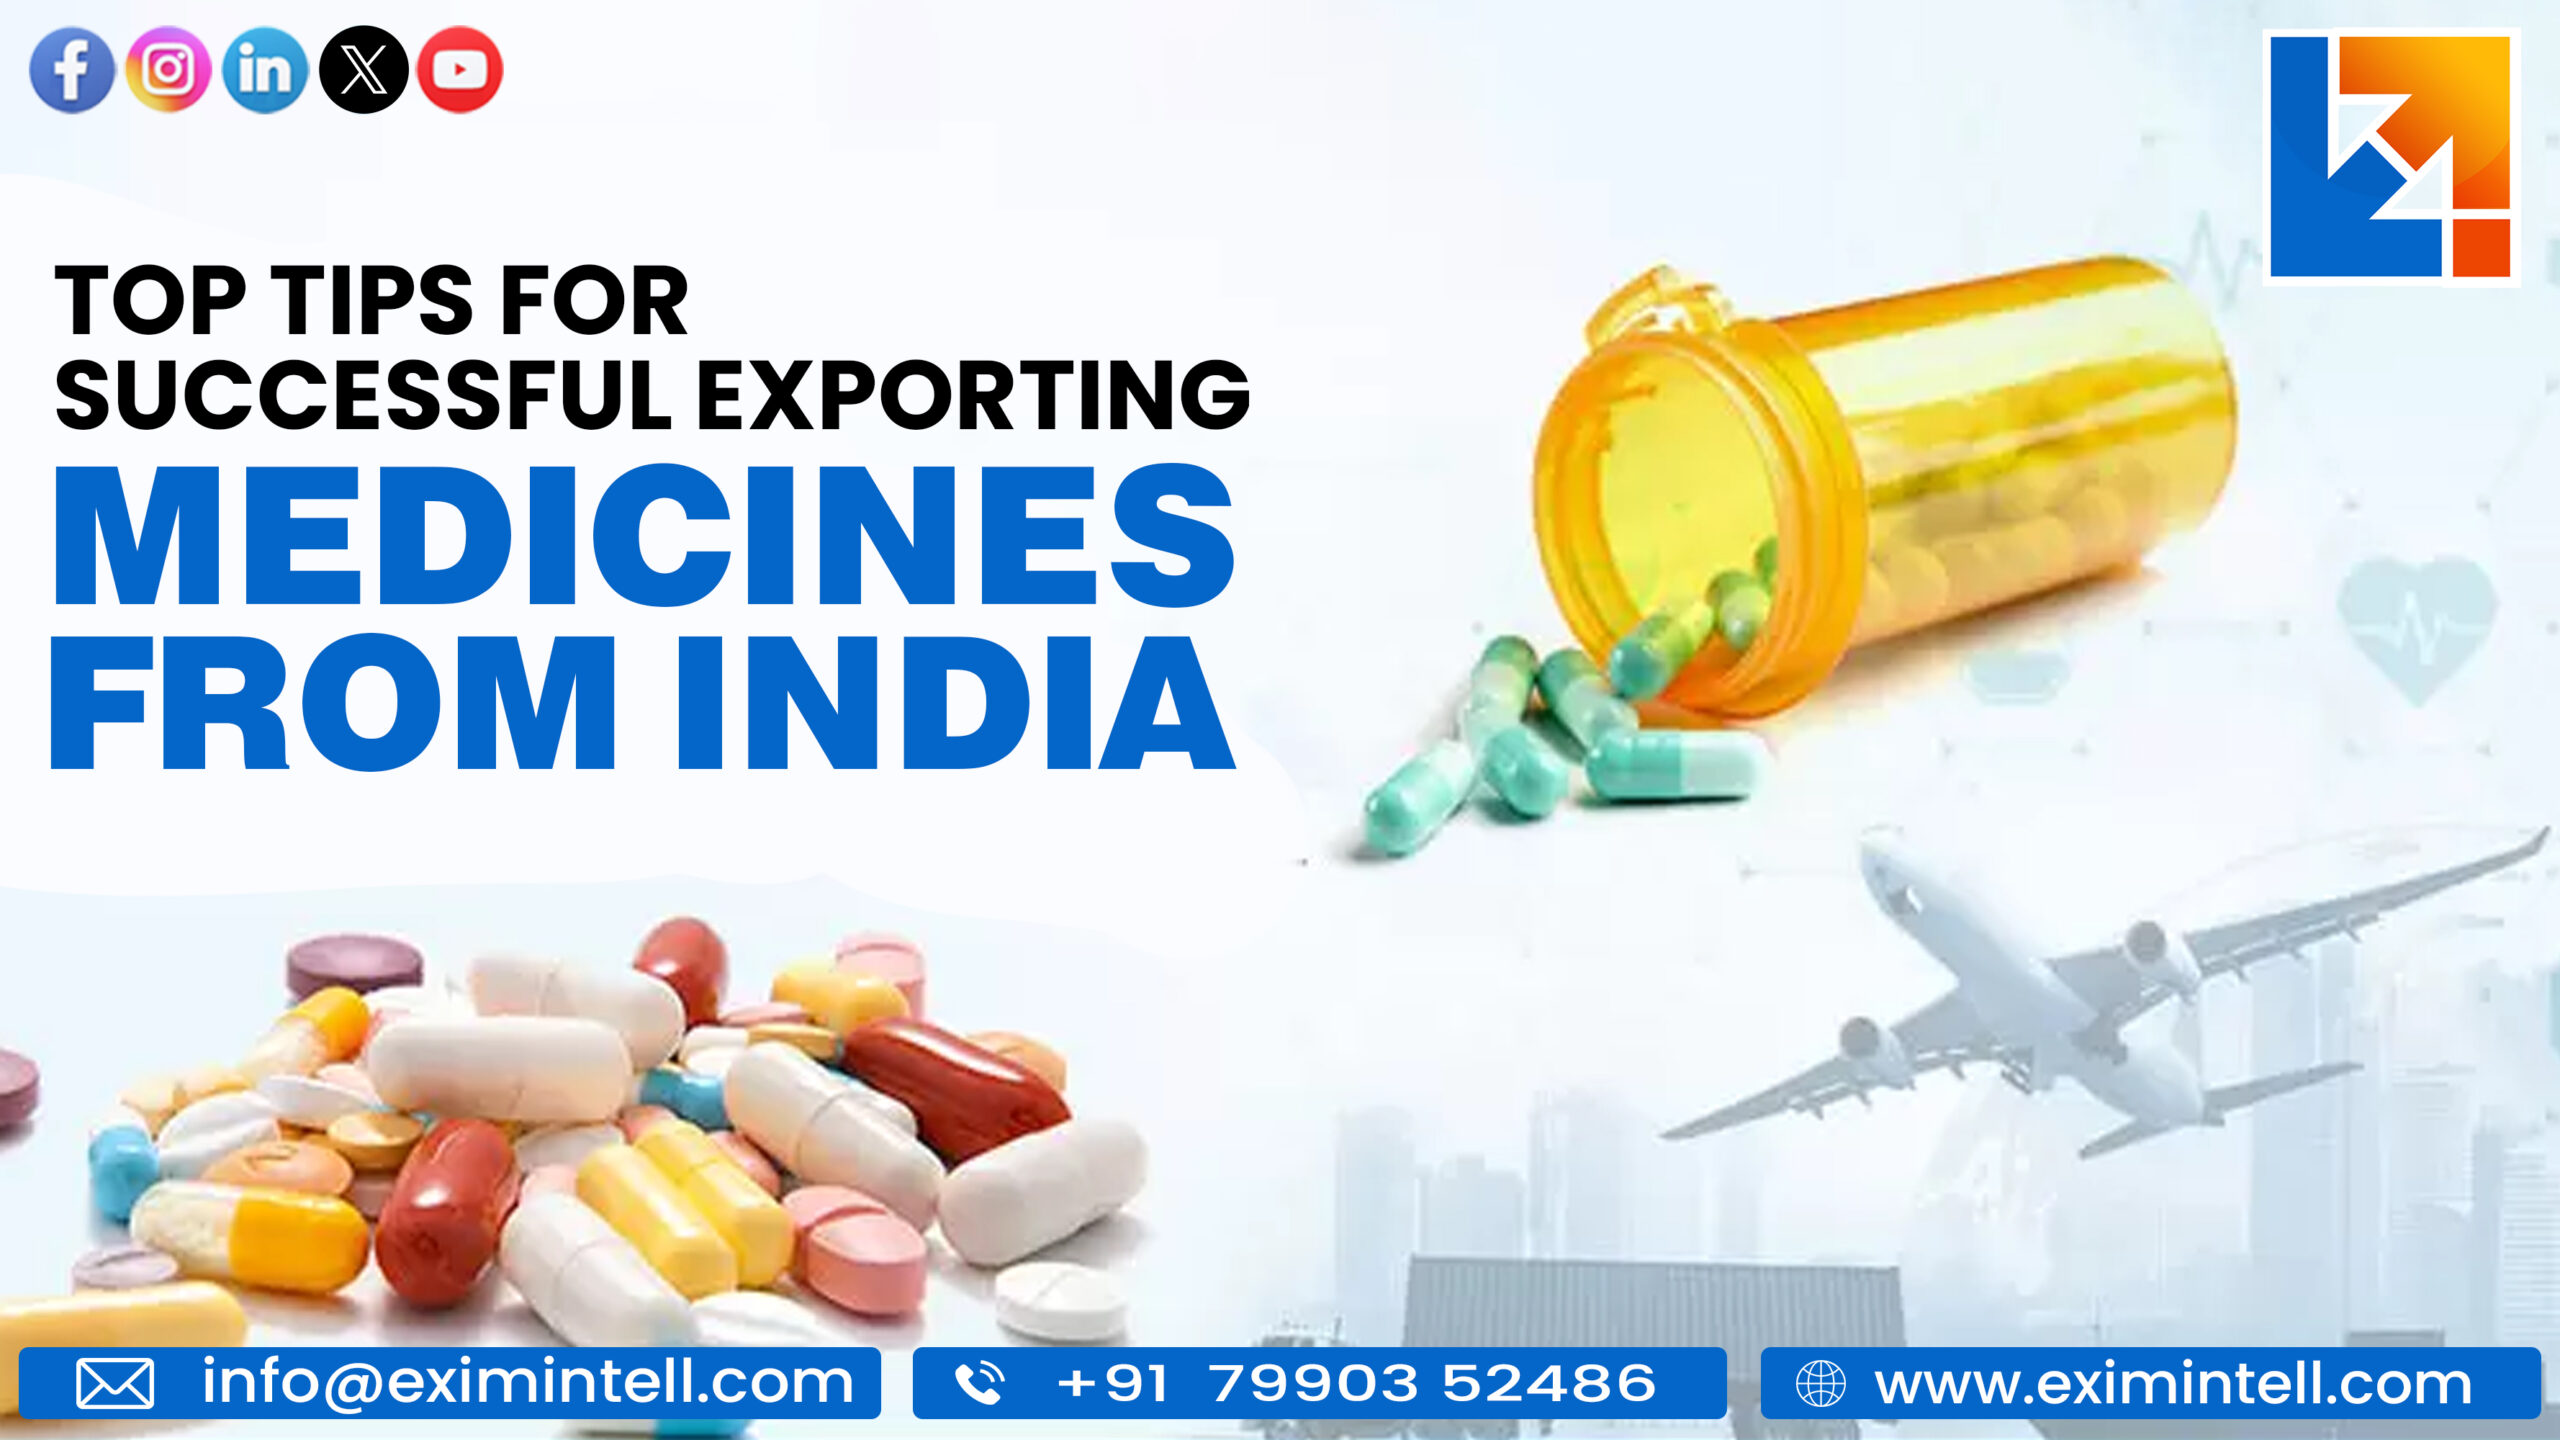 Top Tips for Successful Exporting Medicines from India